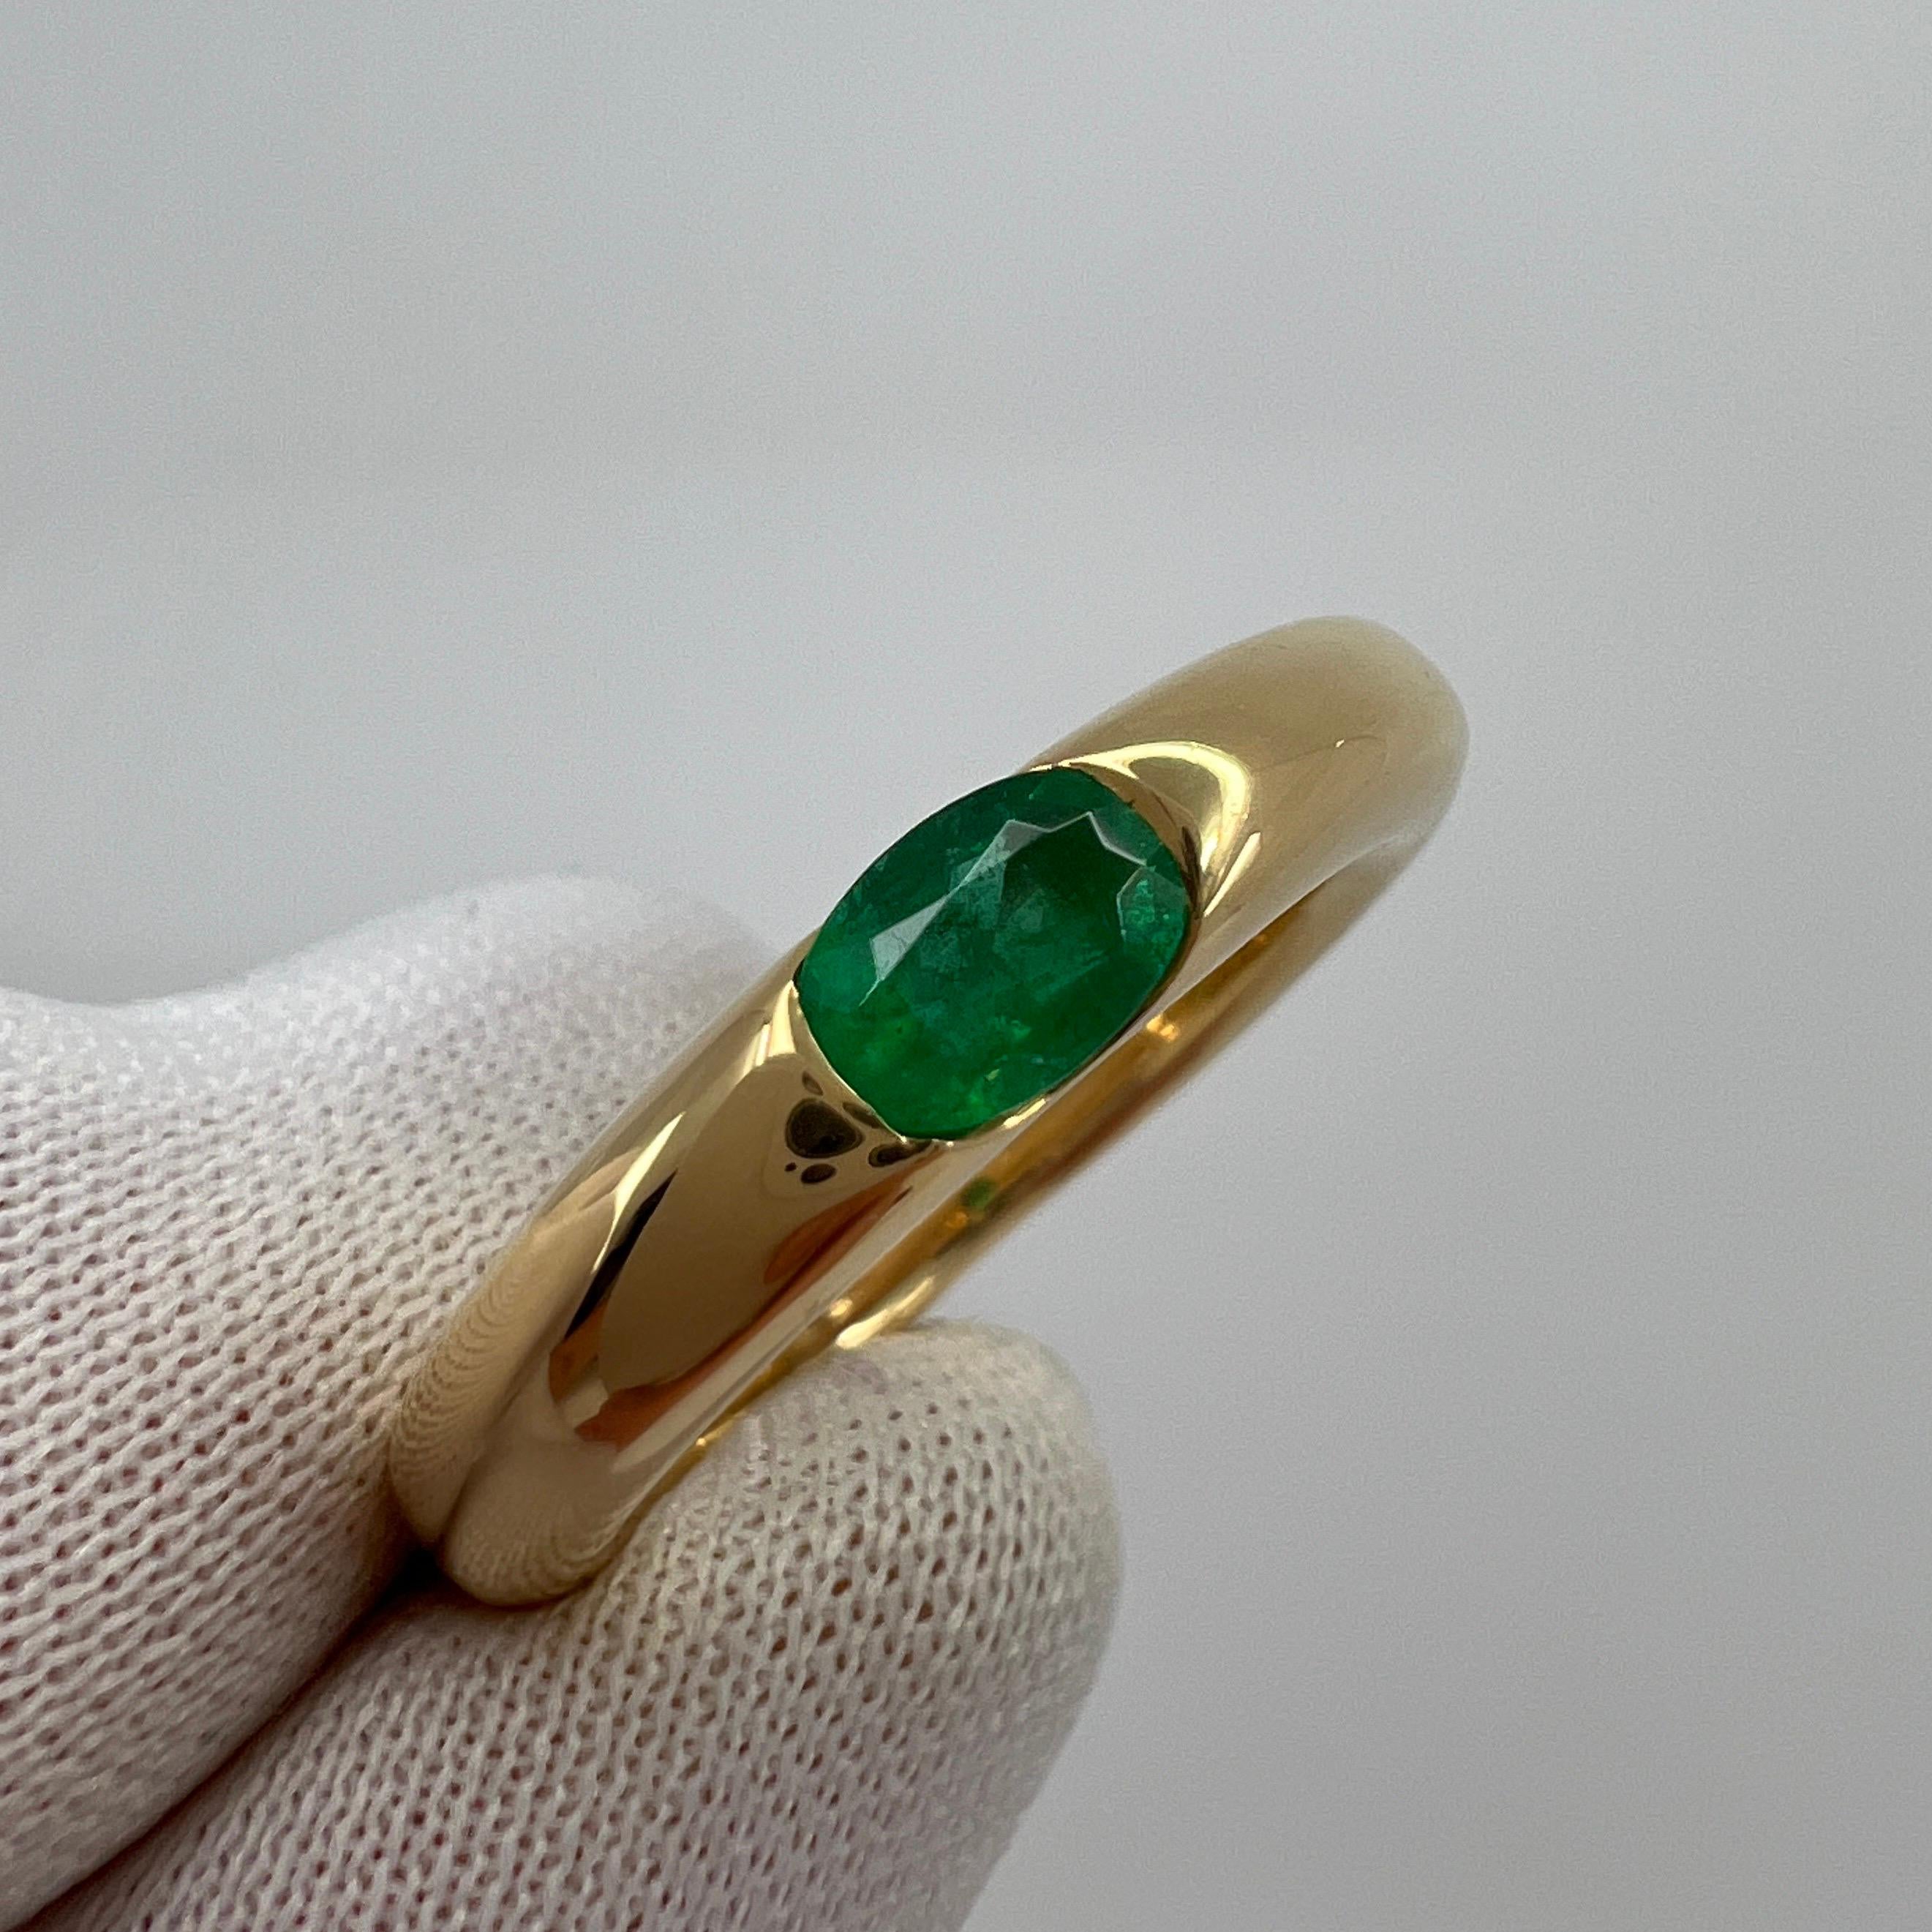 Vintage Cartier Emerald Vivid Green Ellipse 18k Yellow Gold Solitaire Ring 52 6 4